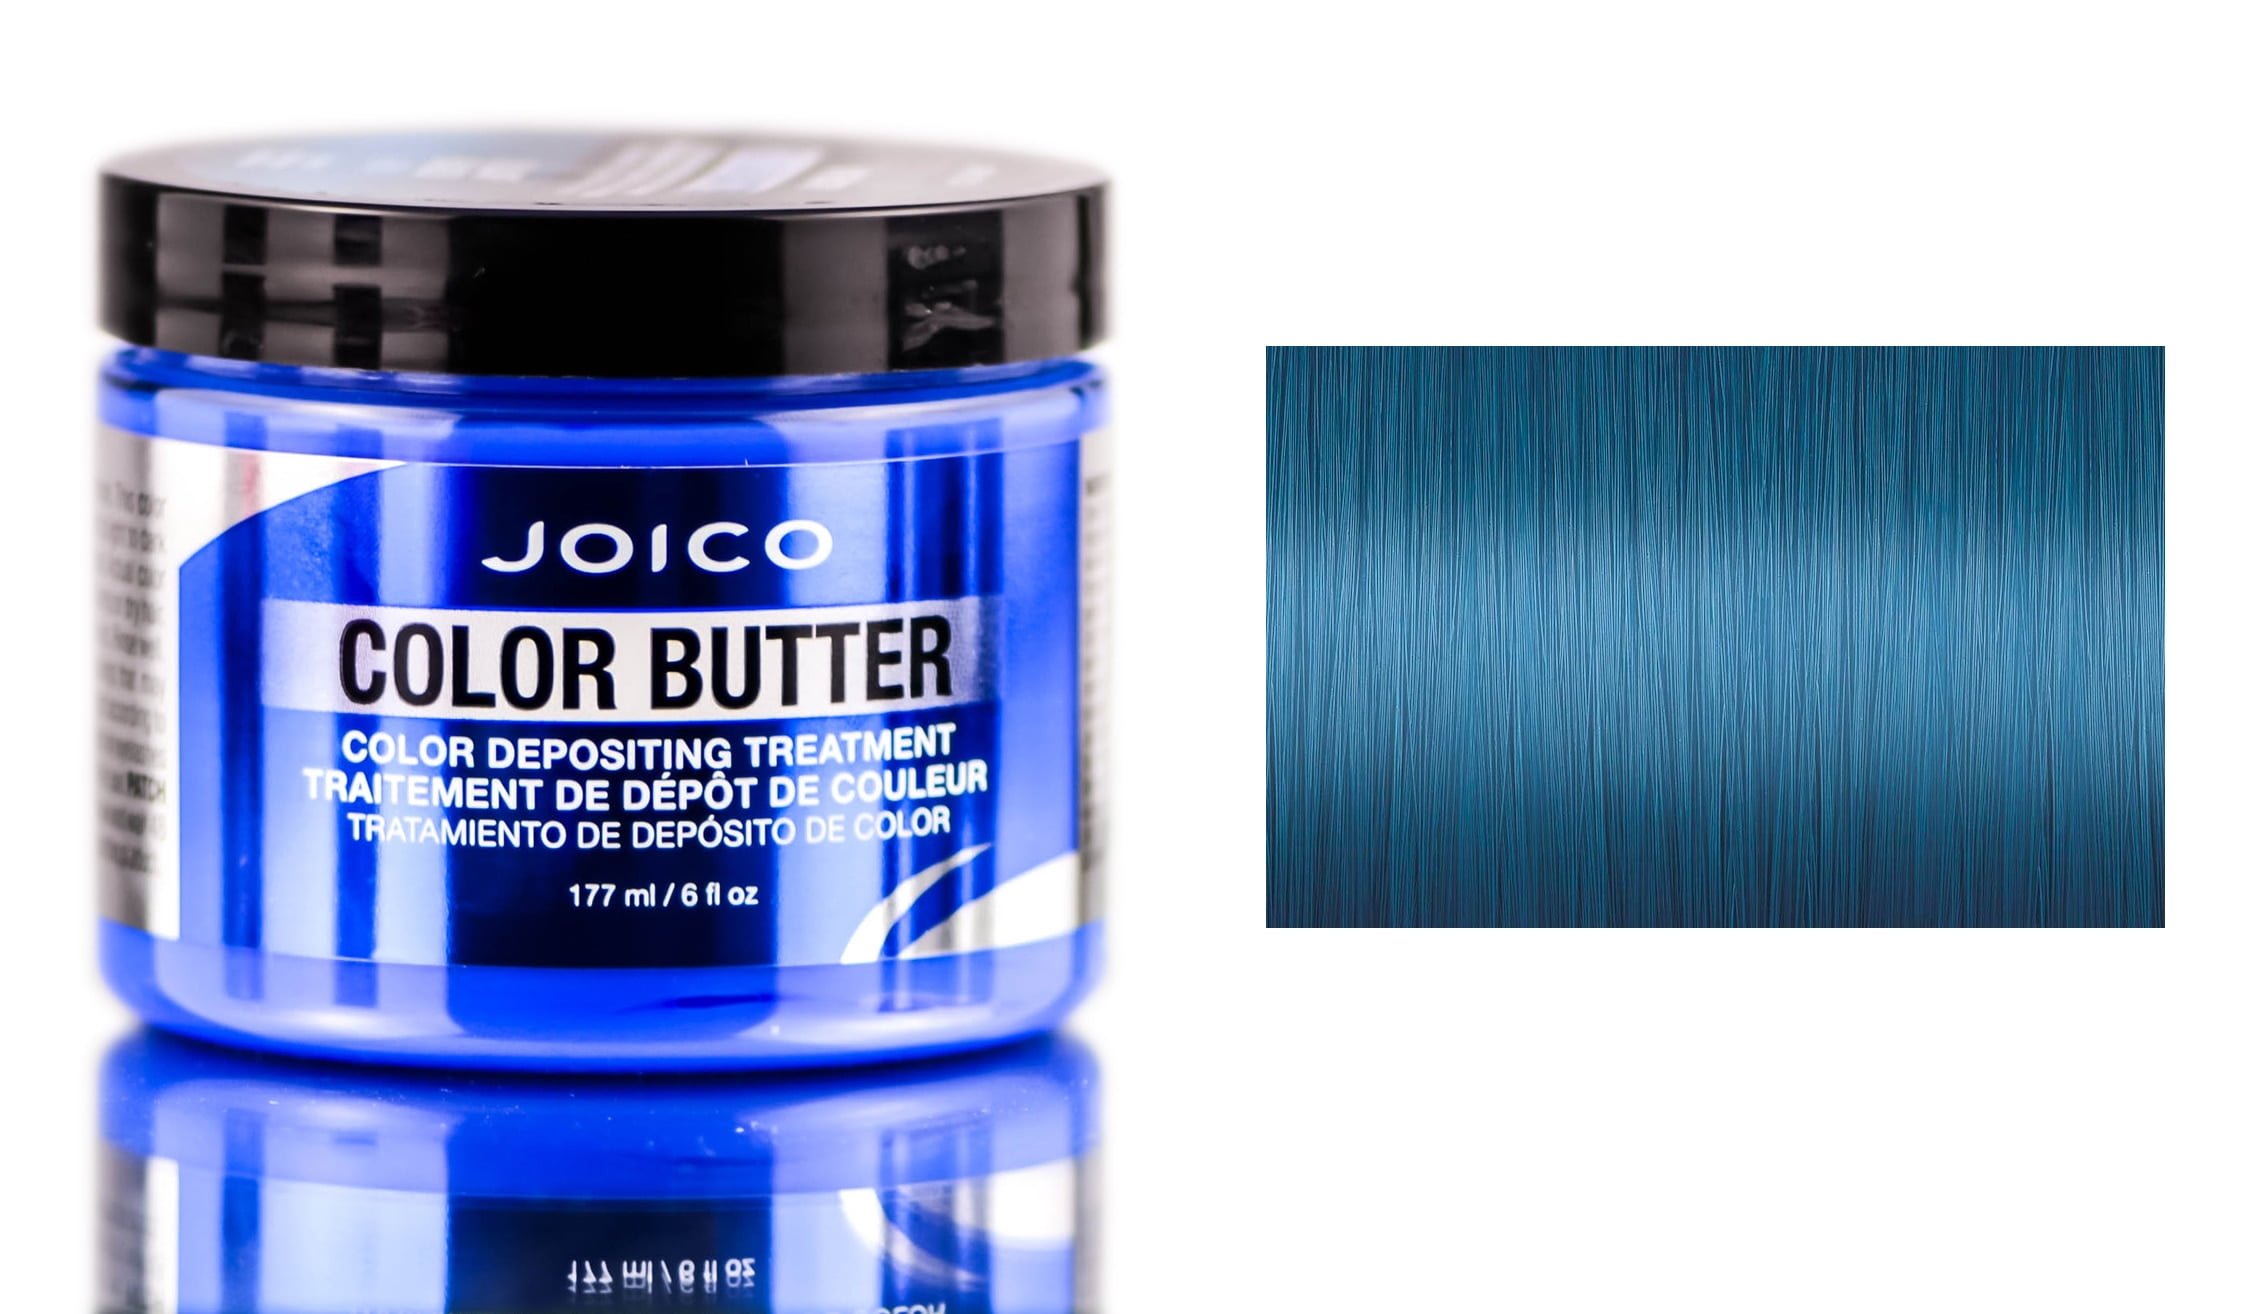 3. Joico Intensity Semi-Permanent Hair Color in Sapphire Blue - wide 6